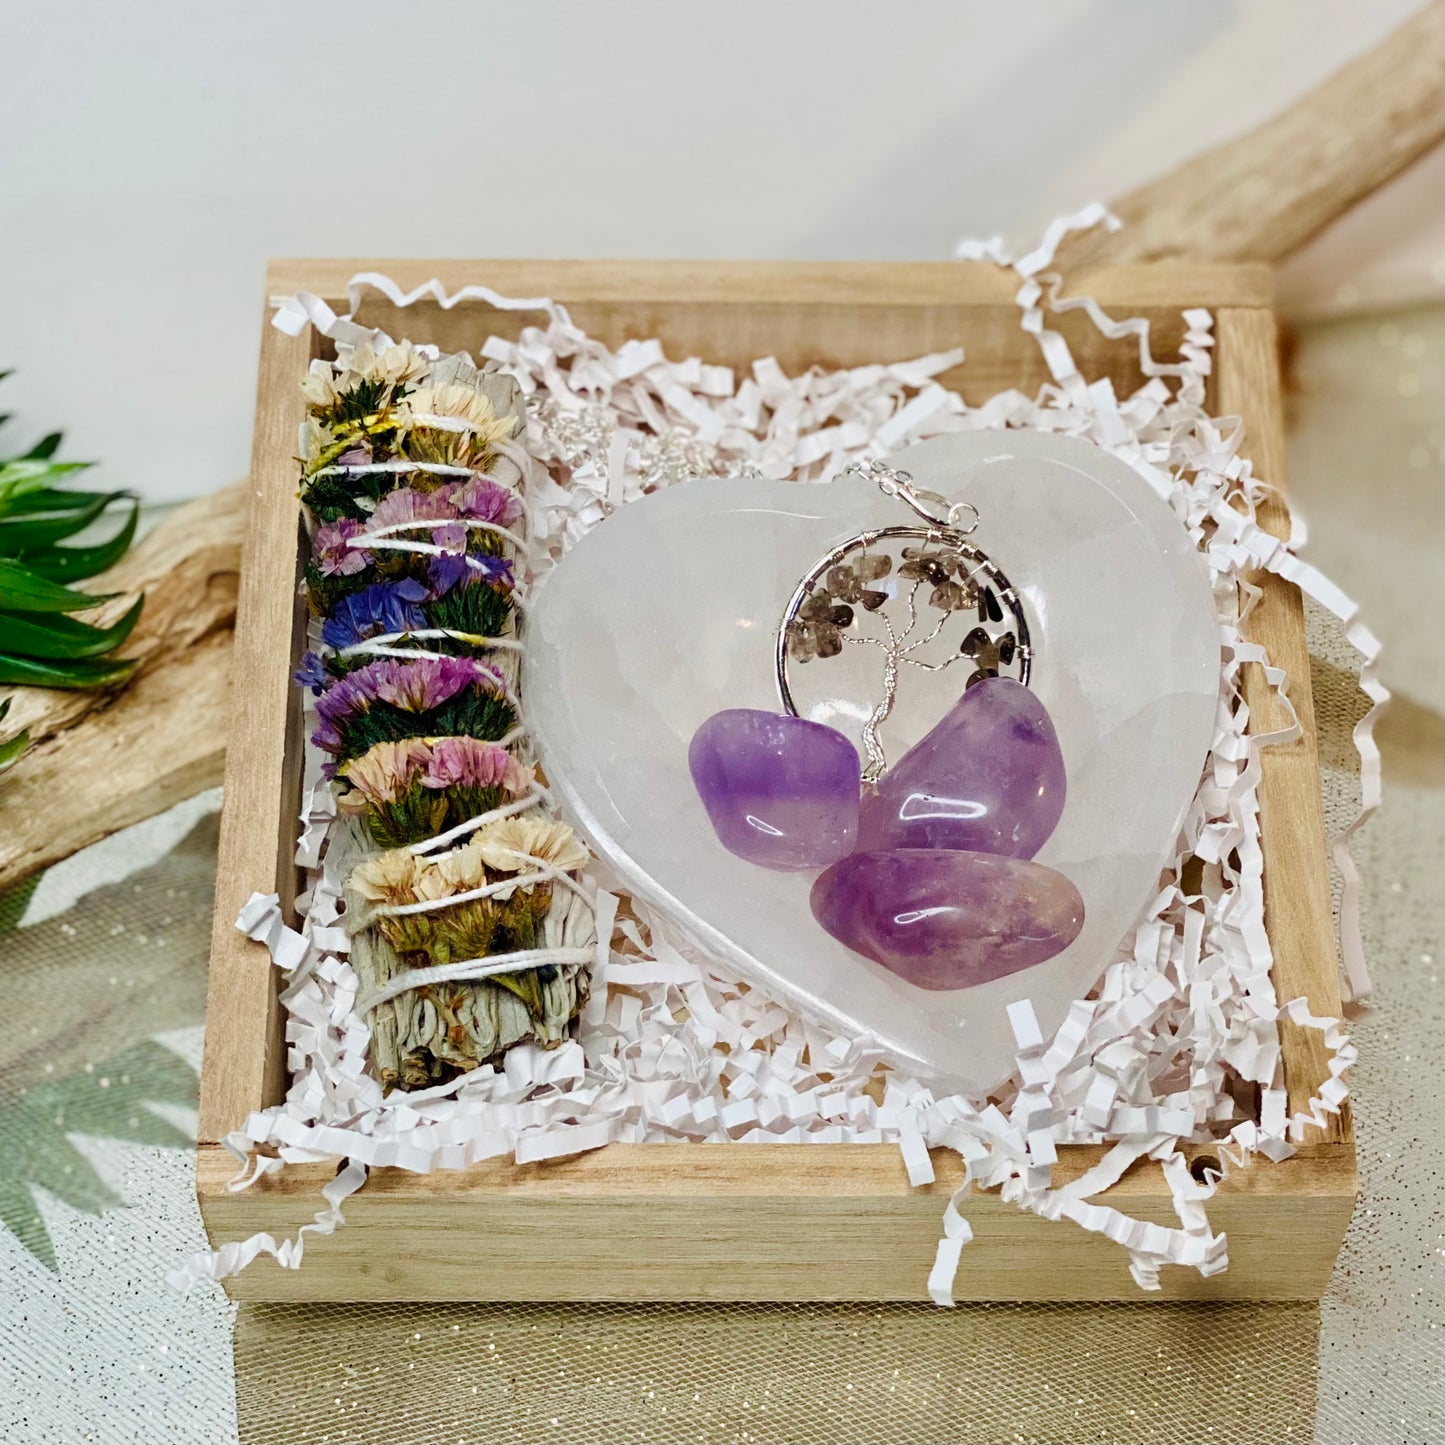 Serenity Bliss Gift Set: Heart Shaped Selenite Bowl, Amethyst Crystals, Purple Sage Bundle, and Amethyst Chip Tree of Life Necklace